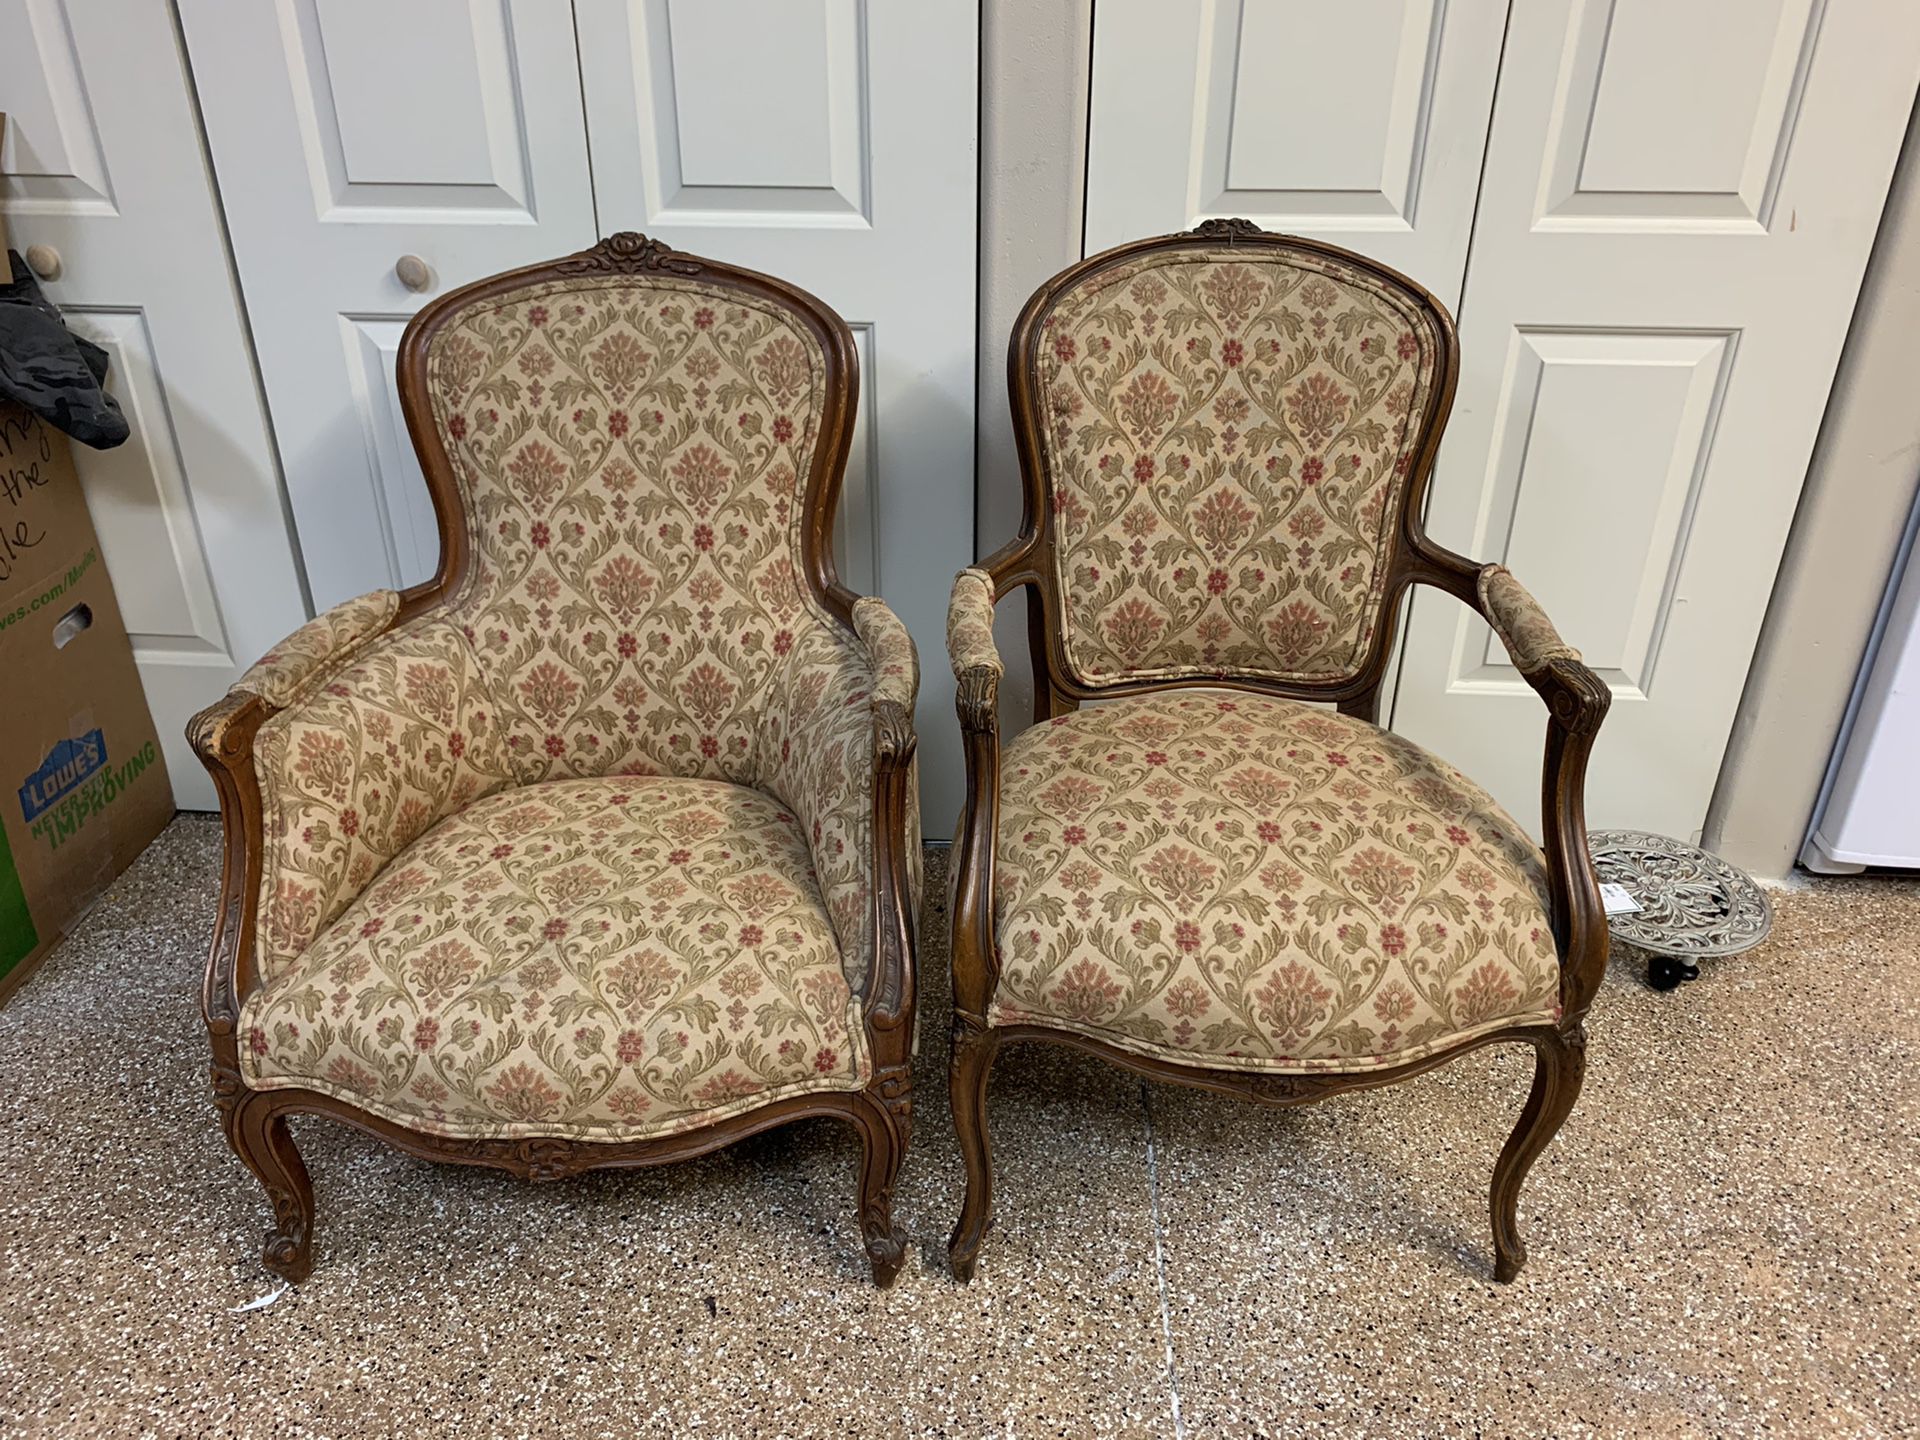 Set of two antique chairs